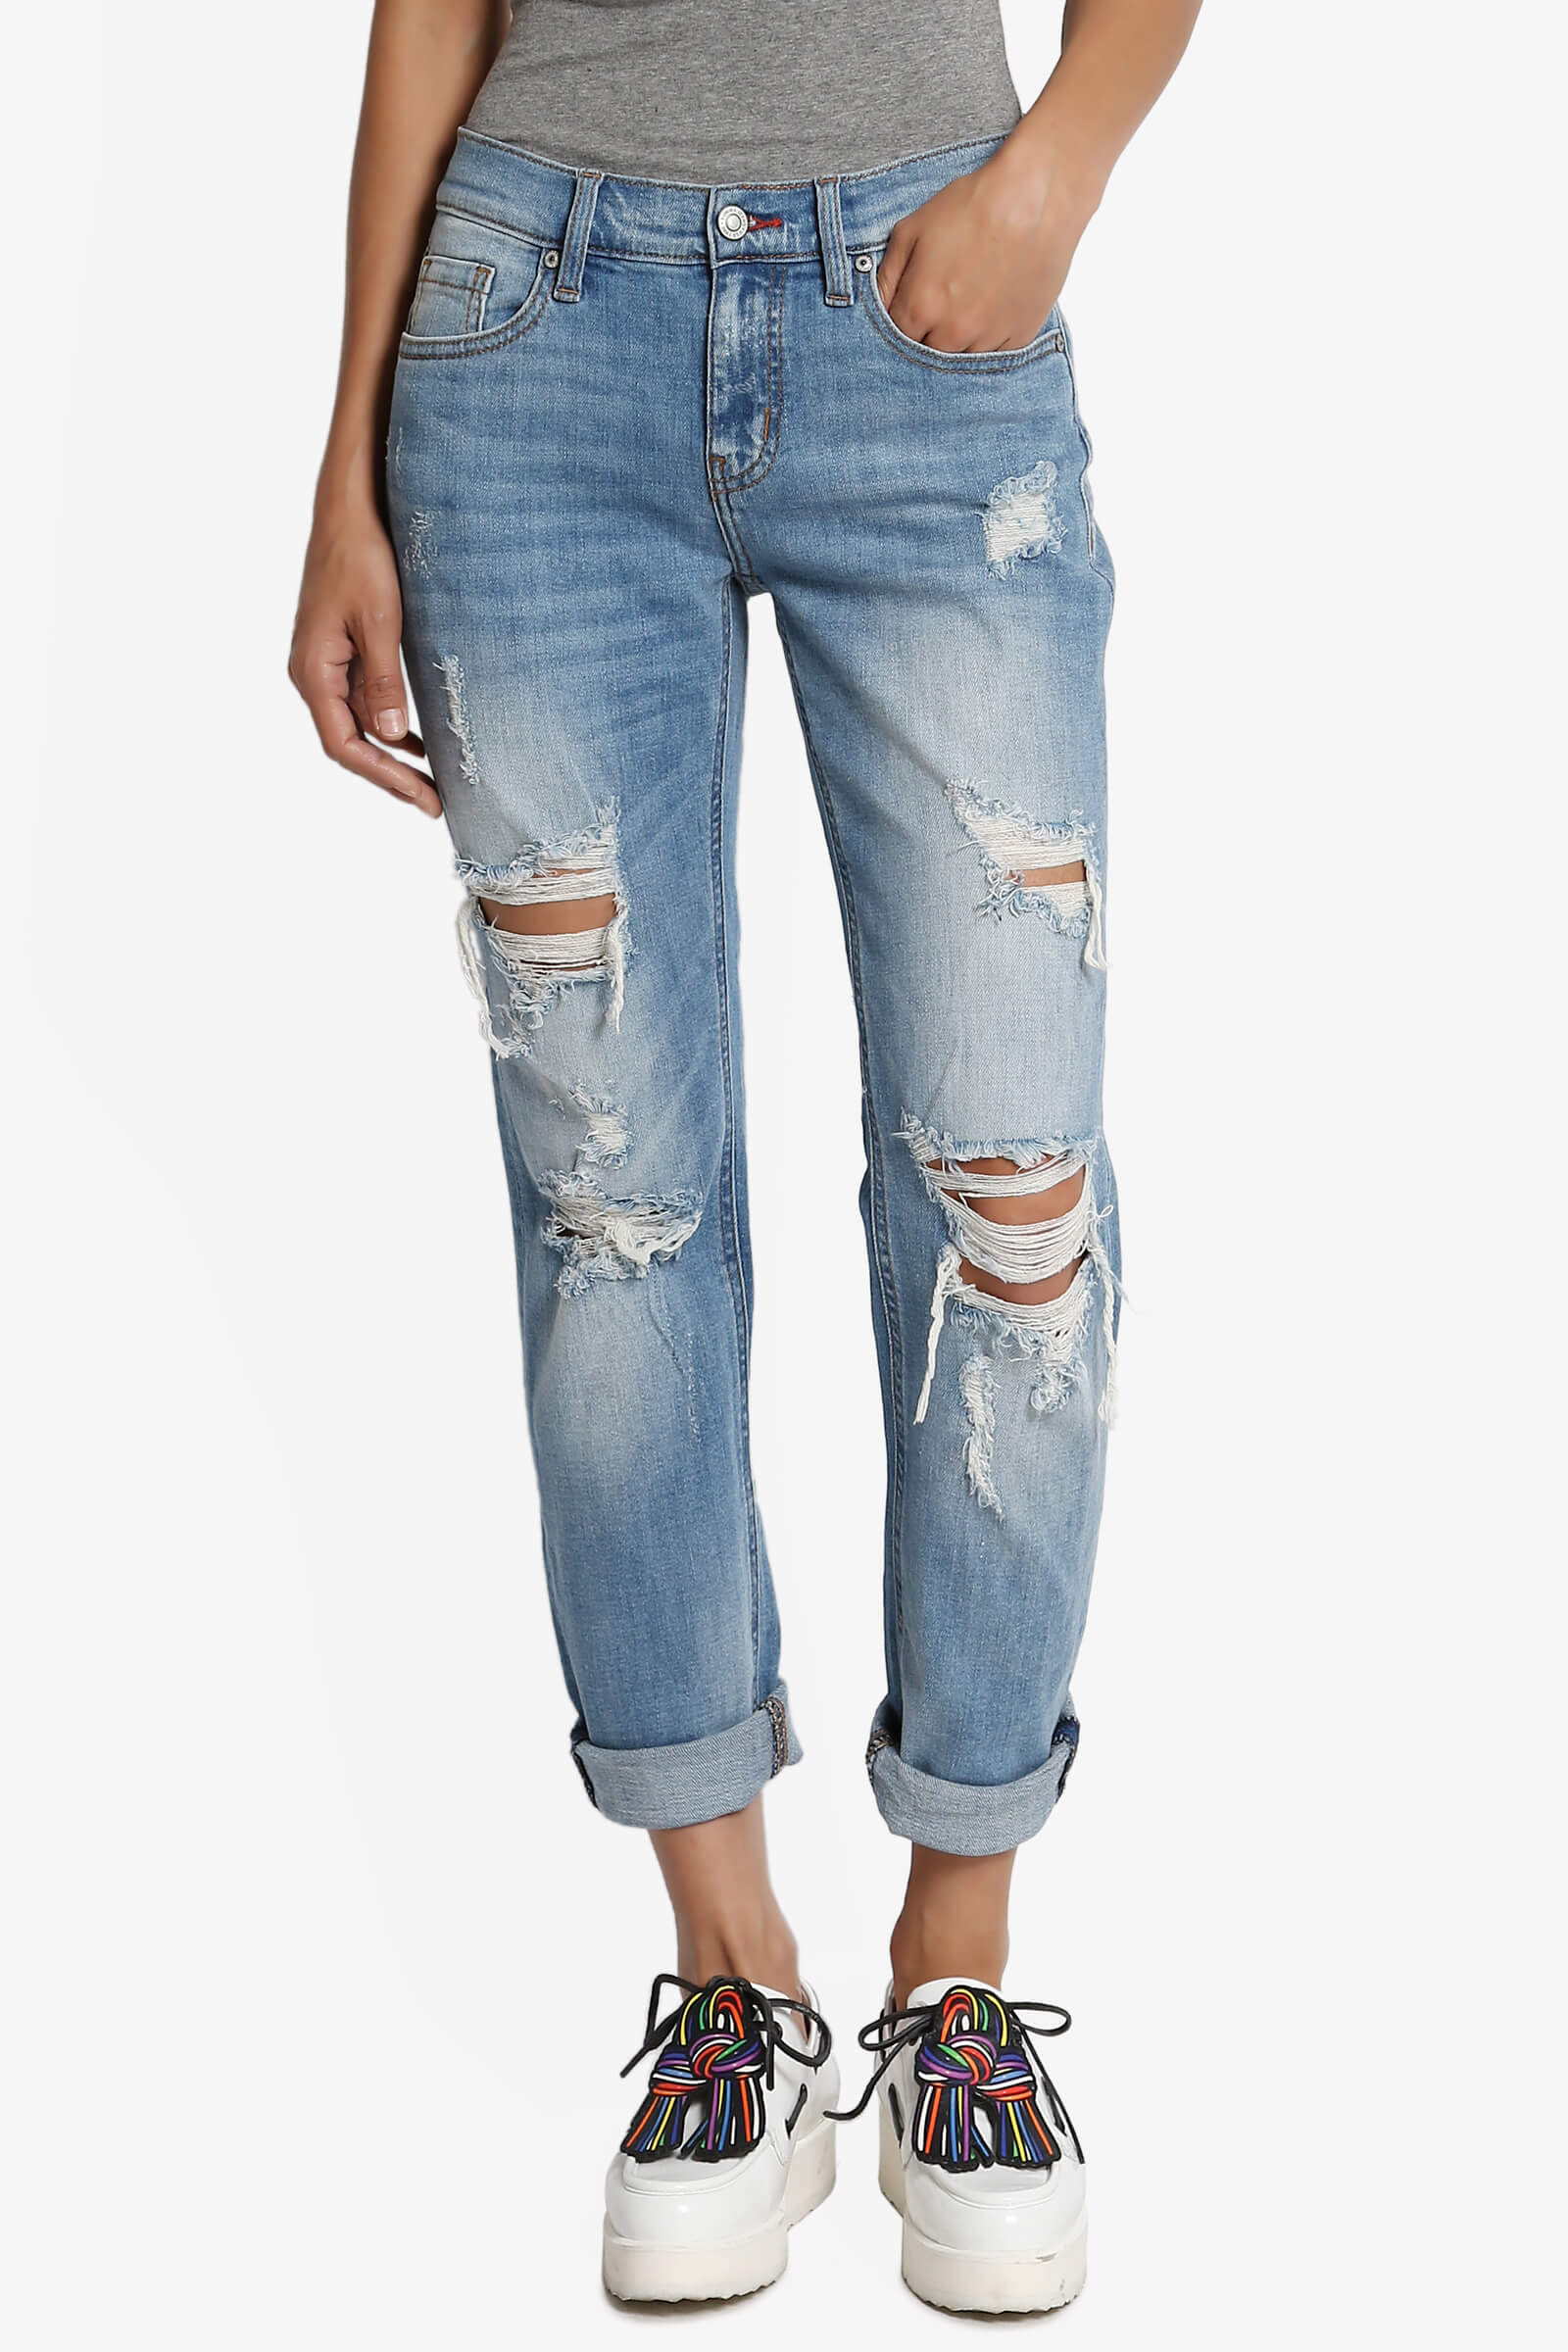 TheMogan Distressed Destructed Washed Denim Mid Rise Relaxed Boyfriend